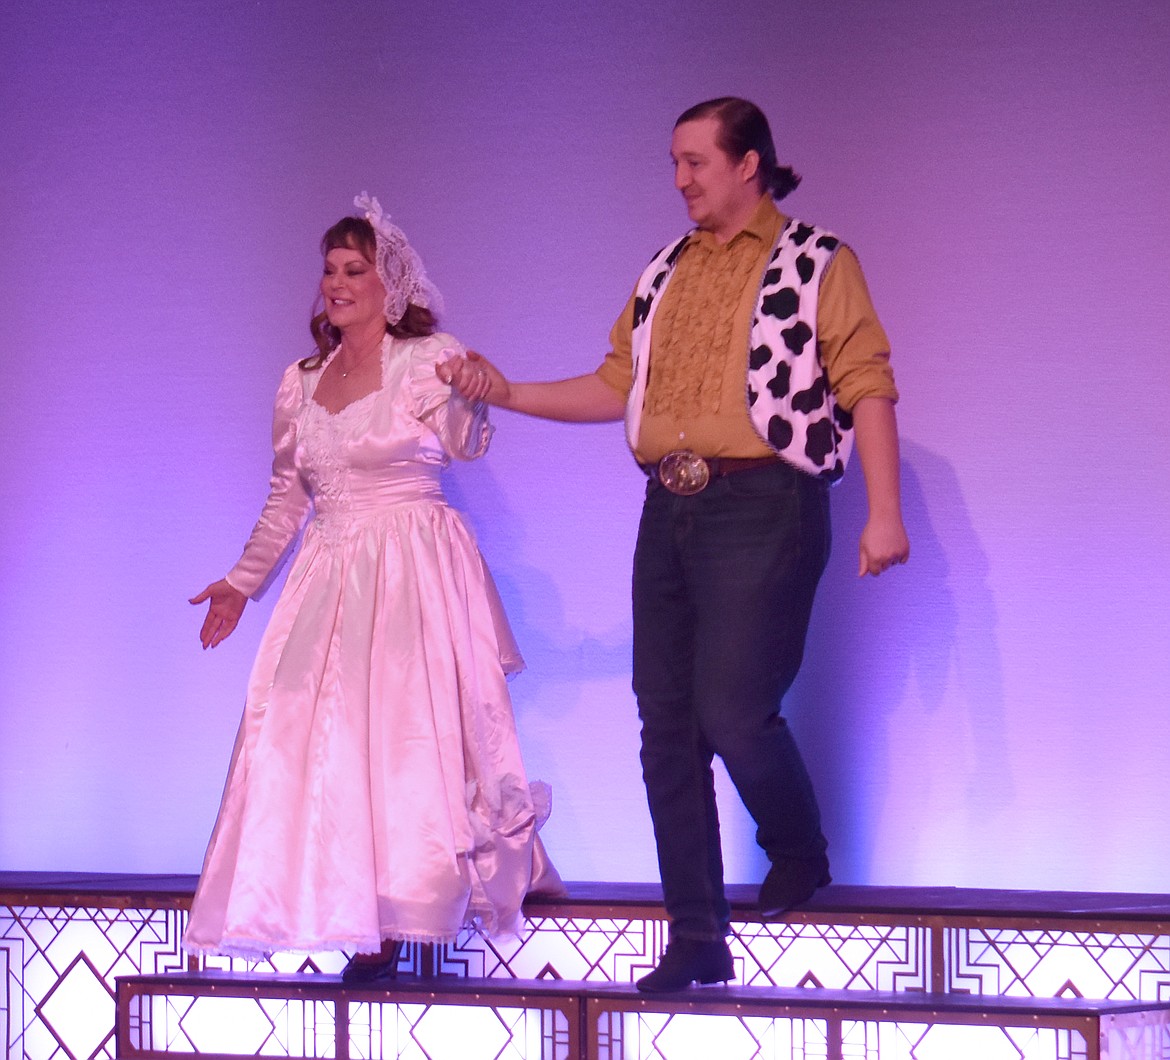 Shannon Hintz, left, and her partner Anthony Whipple enter the stage to be introduced to the audience at Dancing with the Moses Lake Stars Friday.